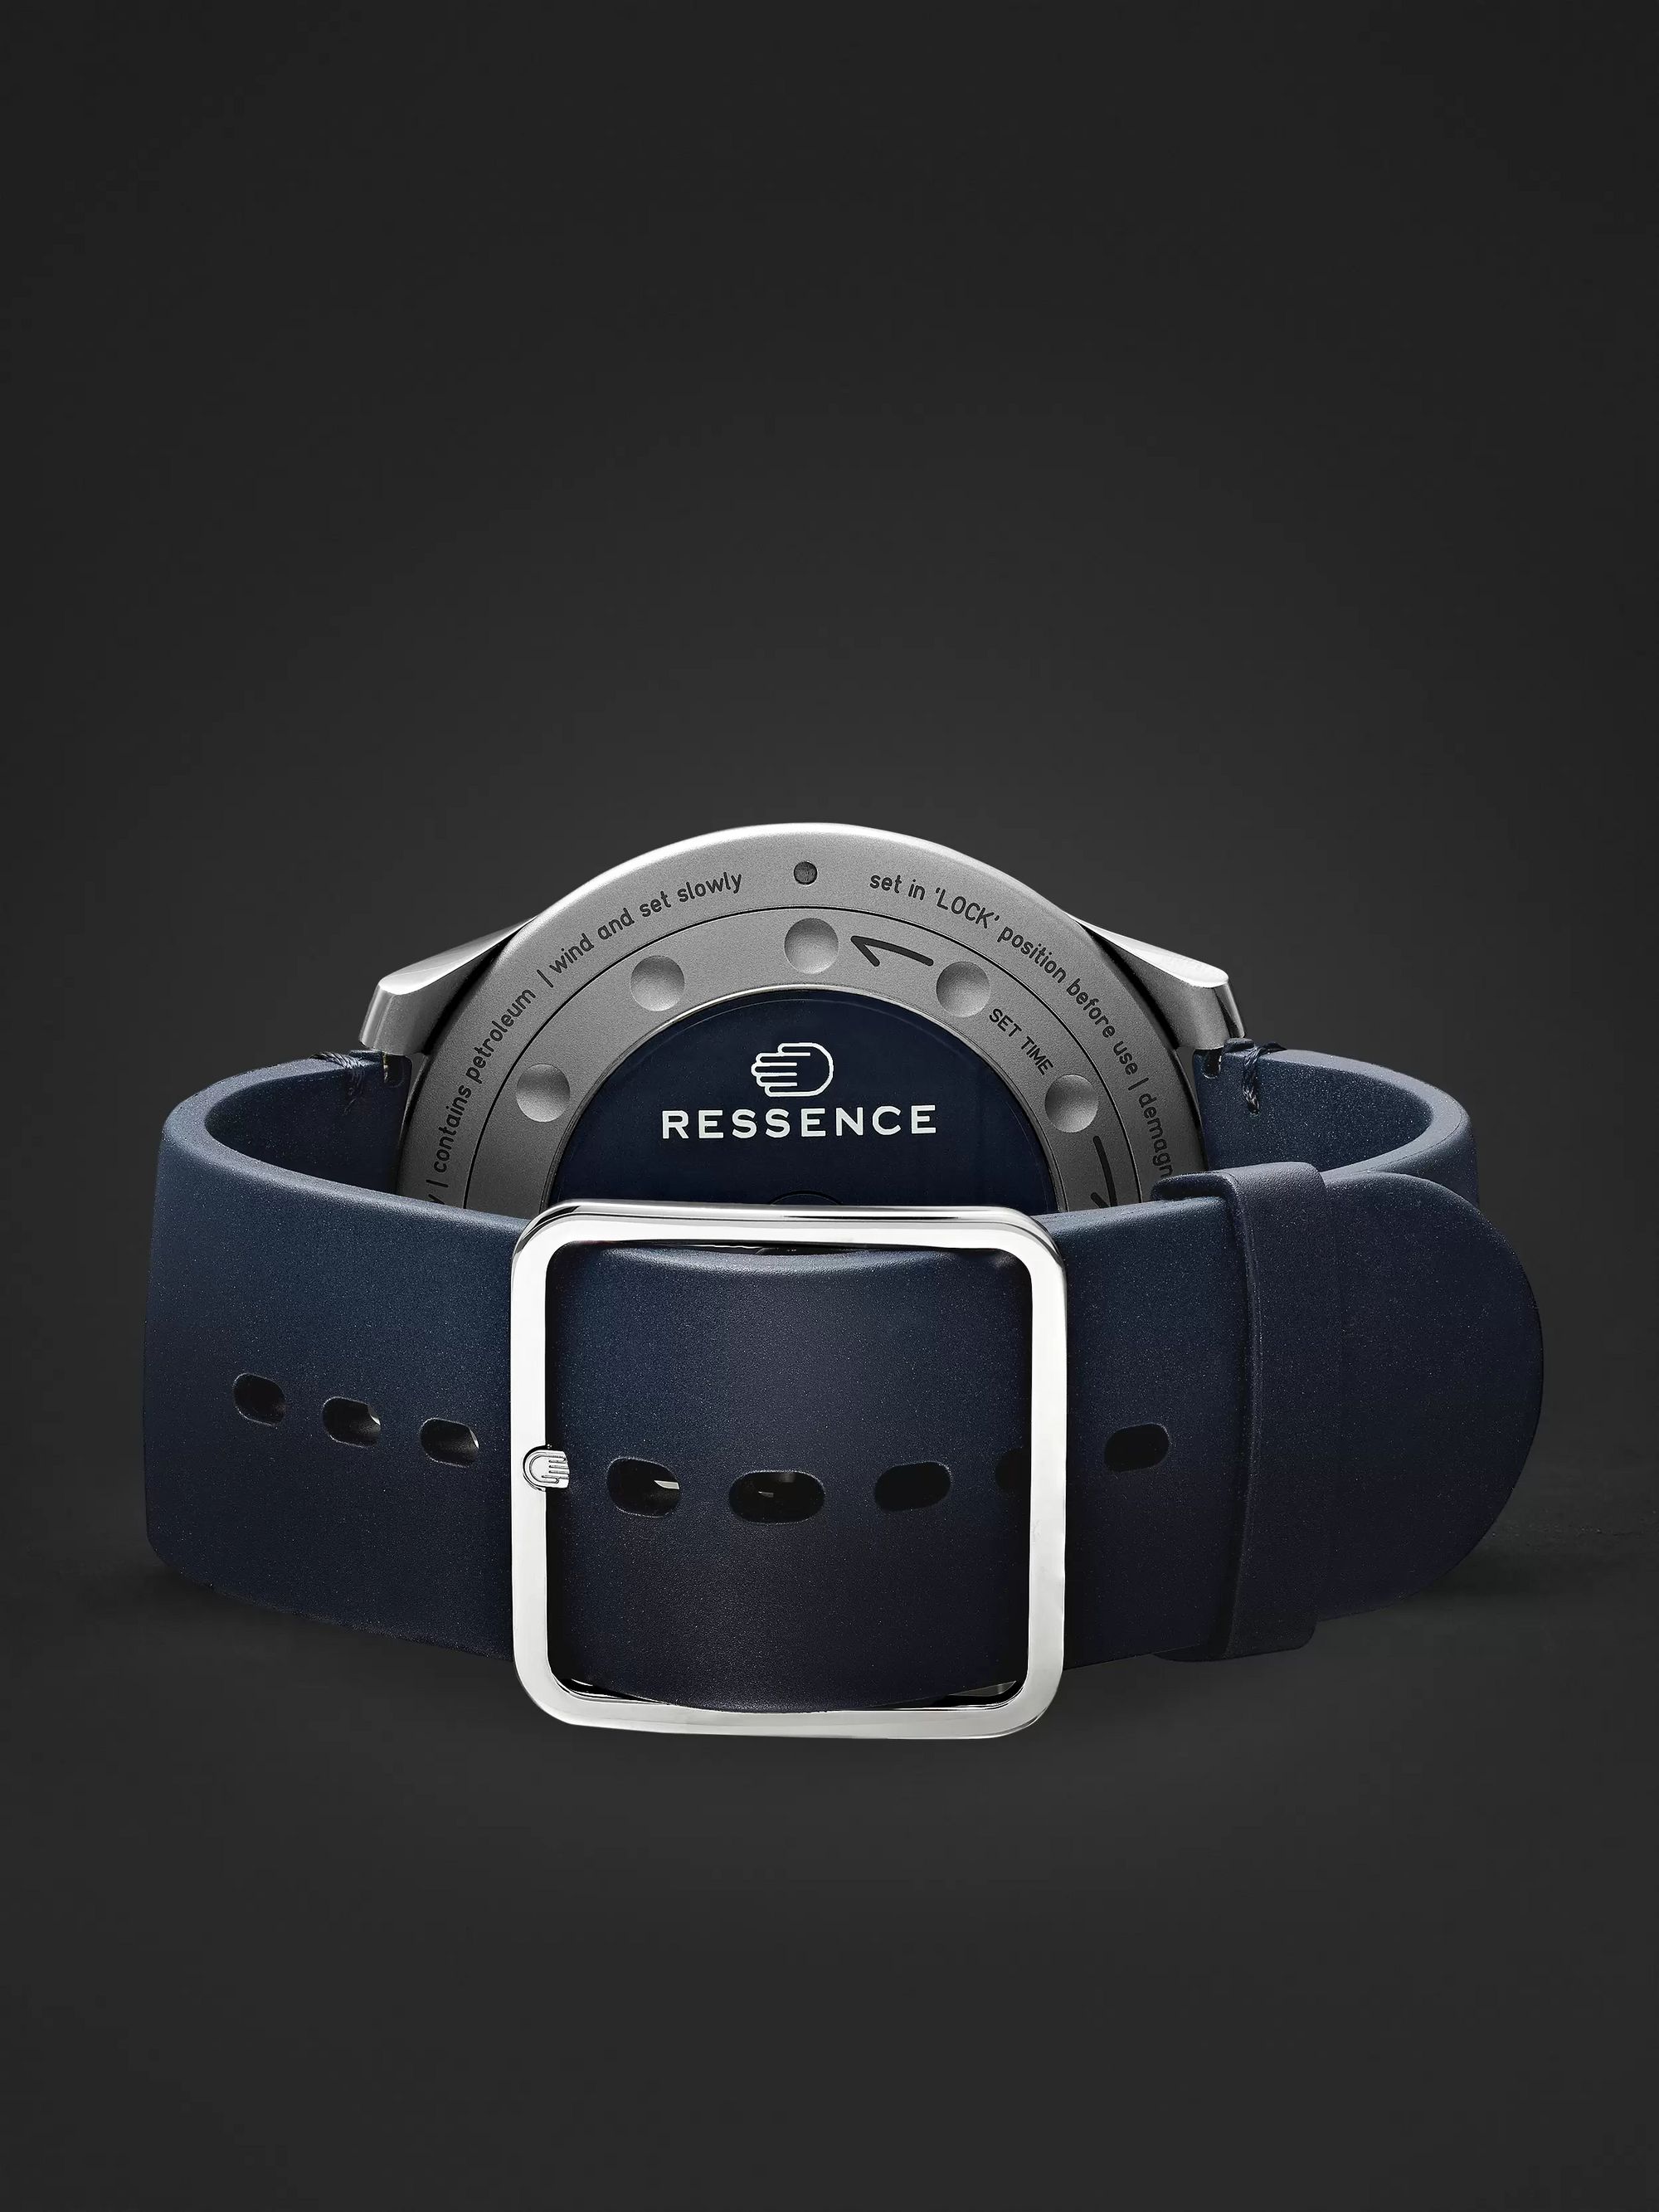 RESSENCE EXCLUSIVE Type 5 46mm Titanium and Leather Mechanical Watch, Ref. No. TYPE 5N